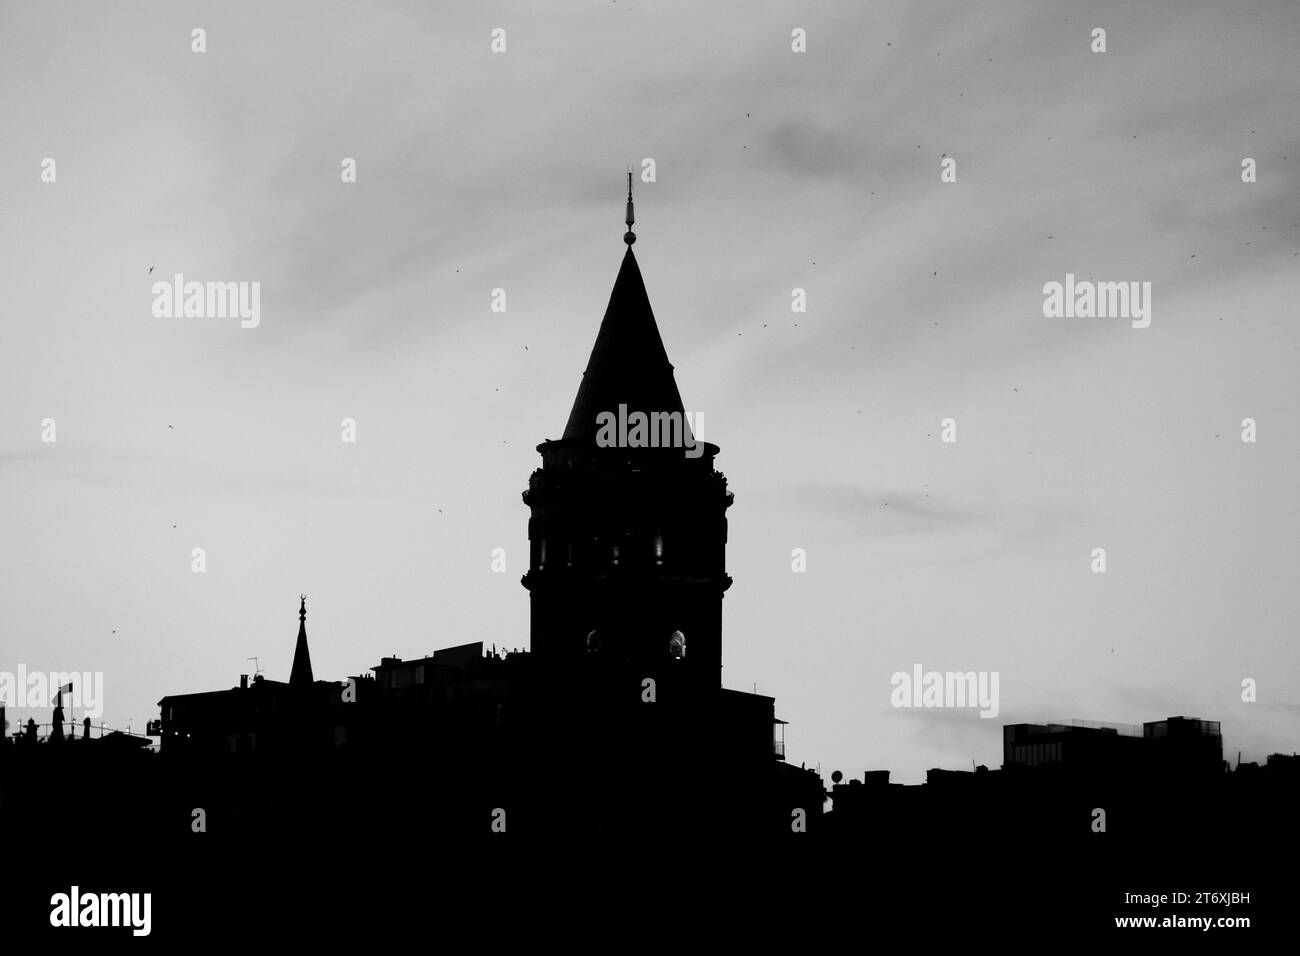 The Silhouettes of Historic Buildings by the Sea in Istanbul's Galata District Stock Photo